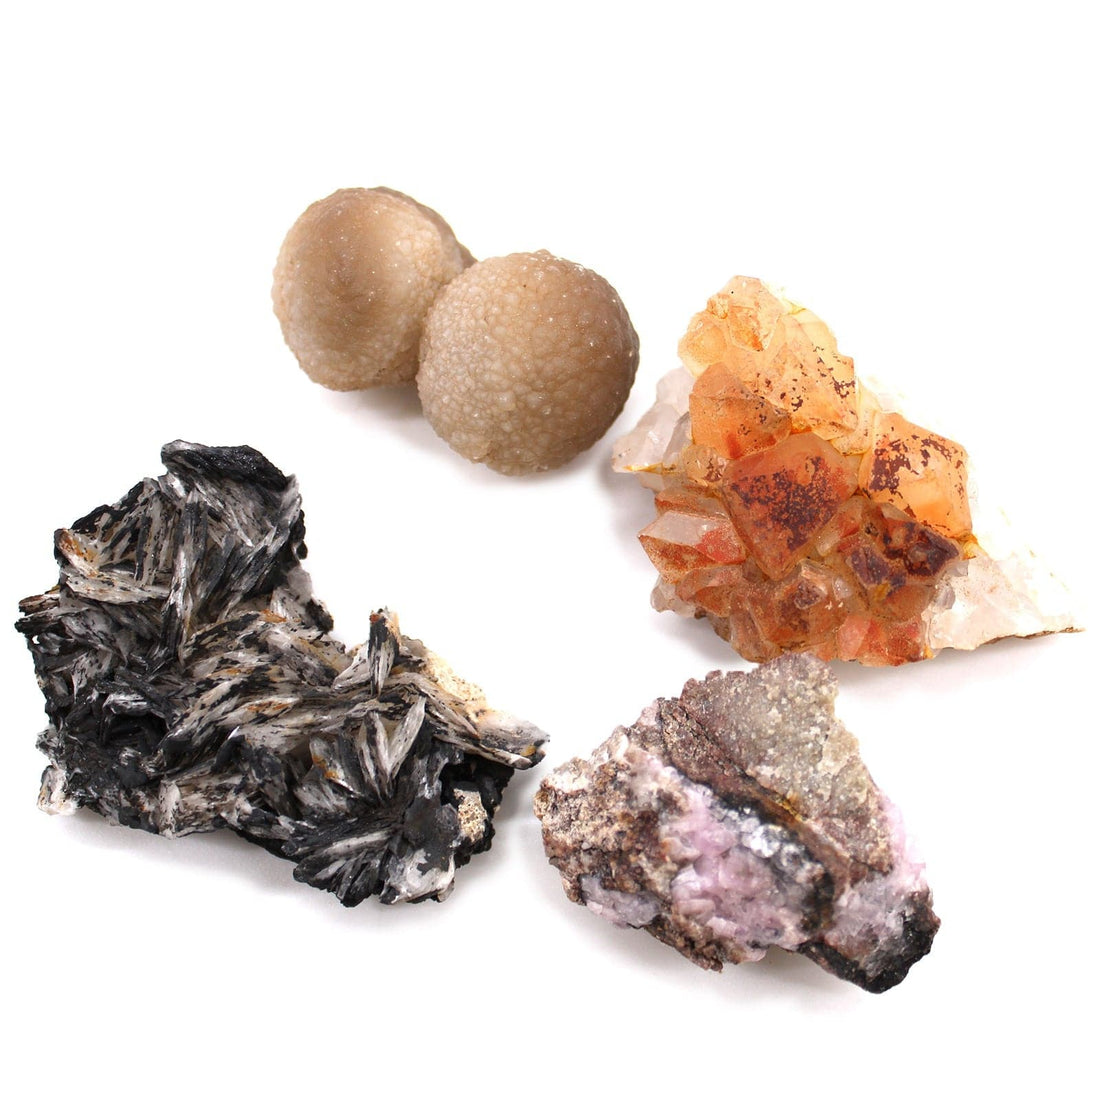 Mineral Specimens - Mixed Pieces (approx 24 pieces) - best price from Maltashopper.com MINSP-08